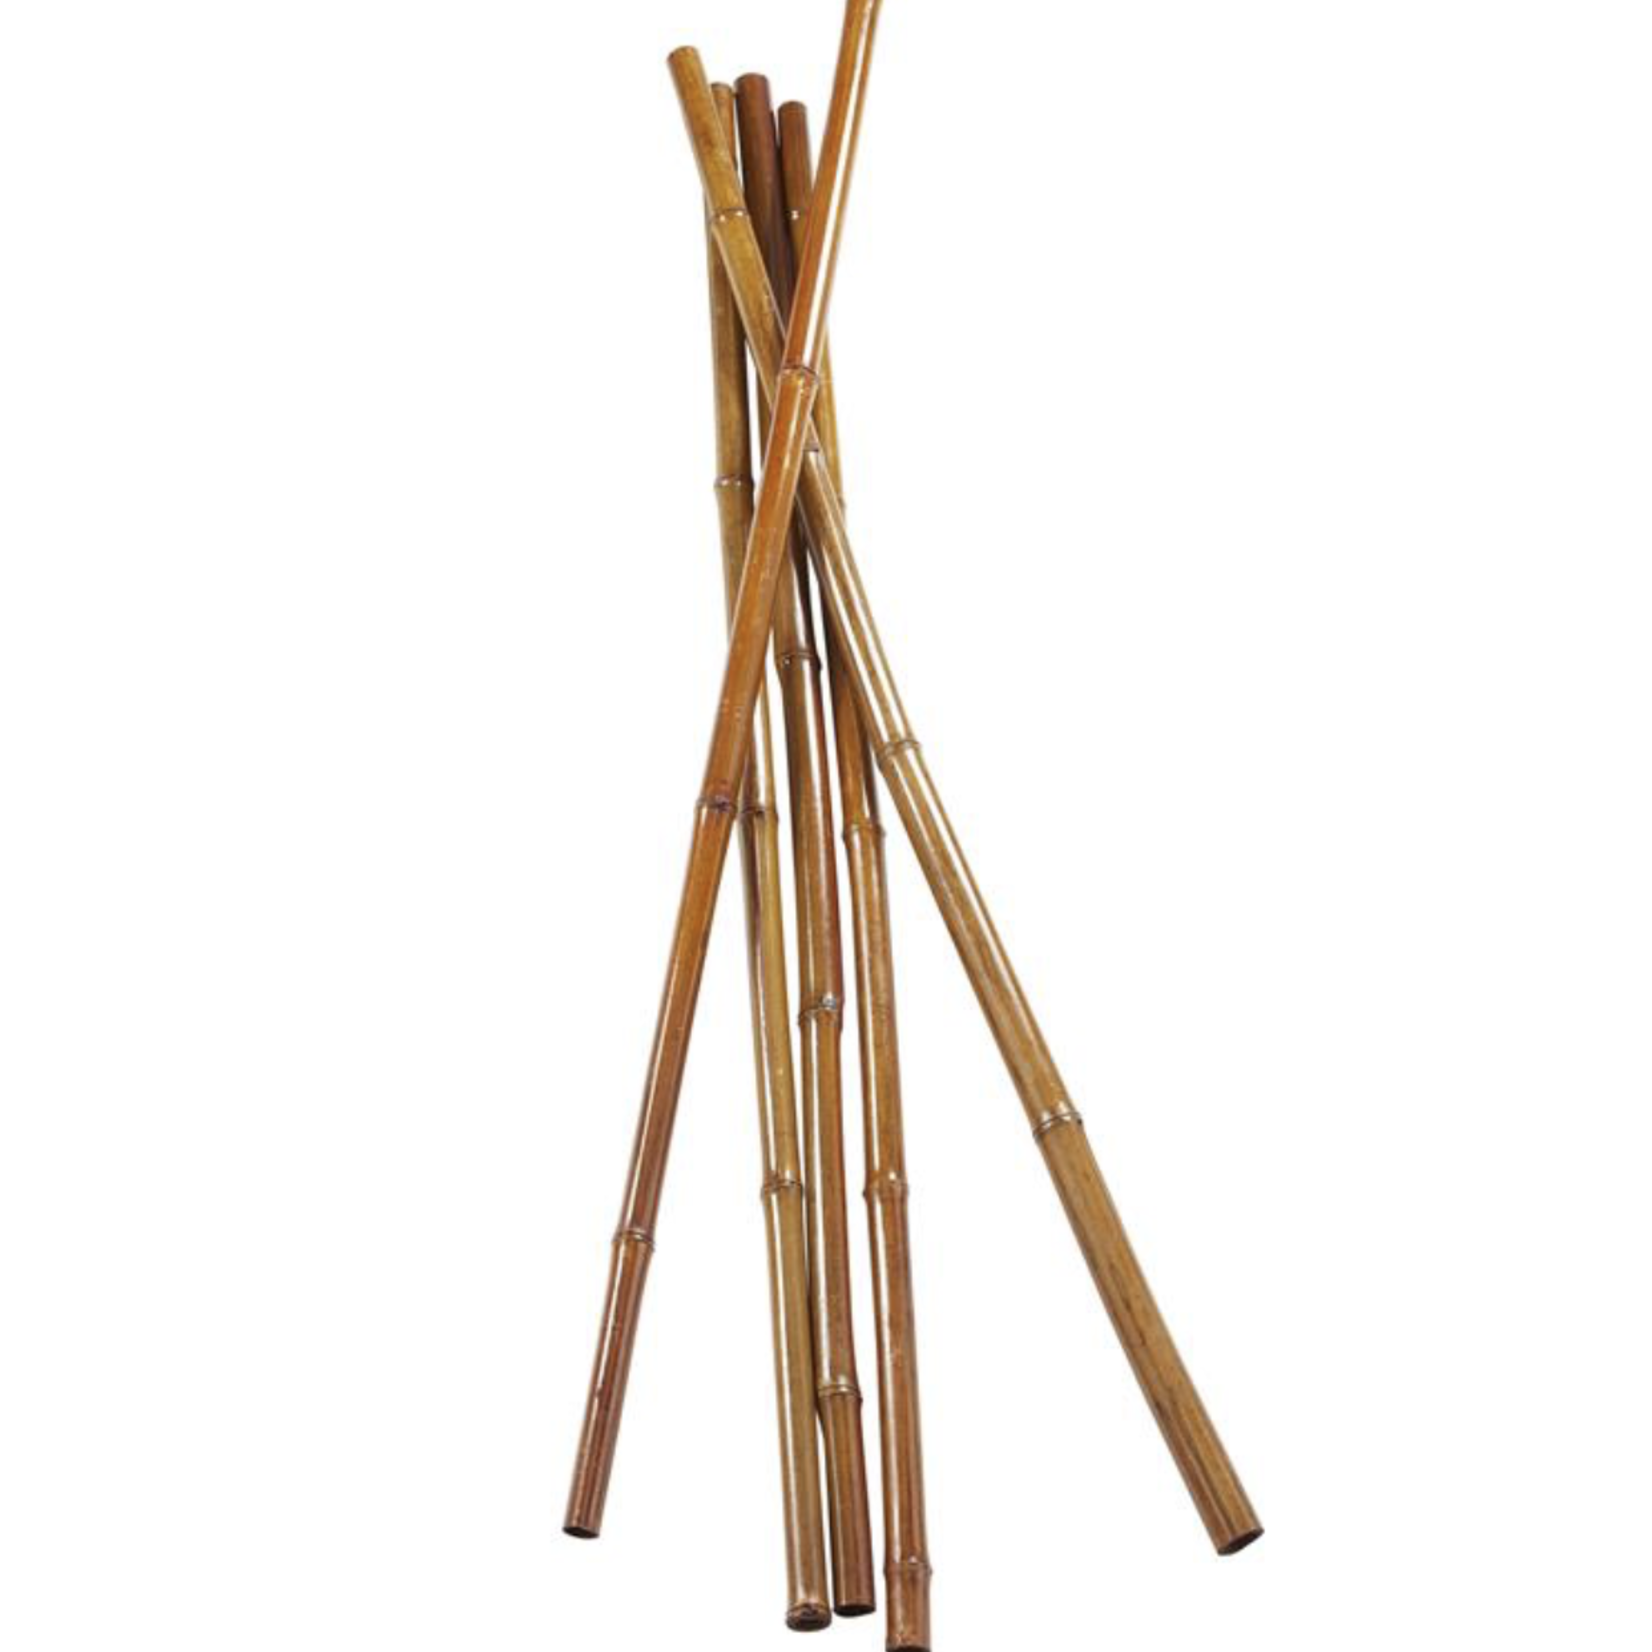 47”L X 1” BROWN DRIED PLANT STICKS NATURAL FOLIAGE BAMBOO STICKS (price per pack of 5))